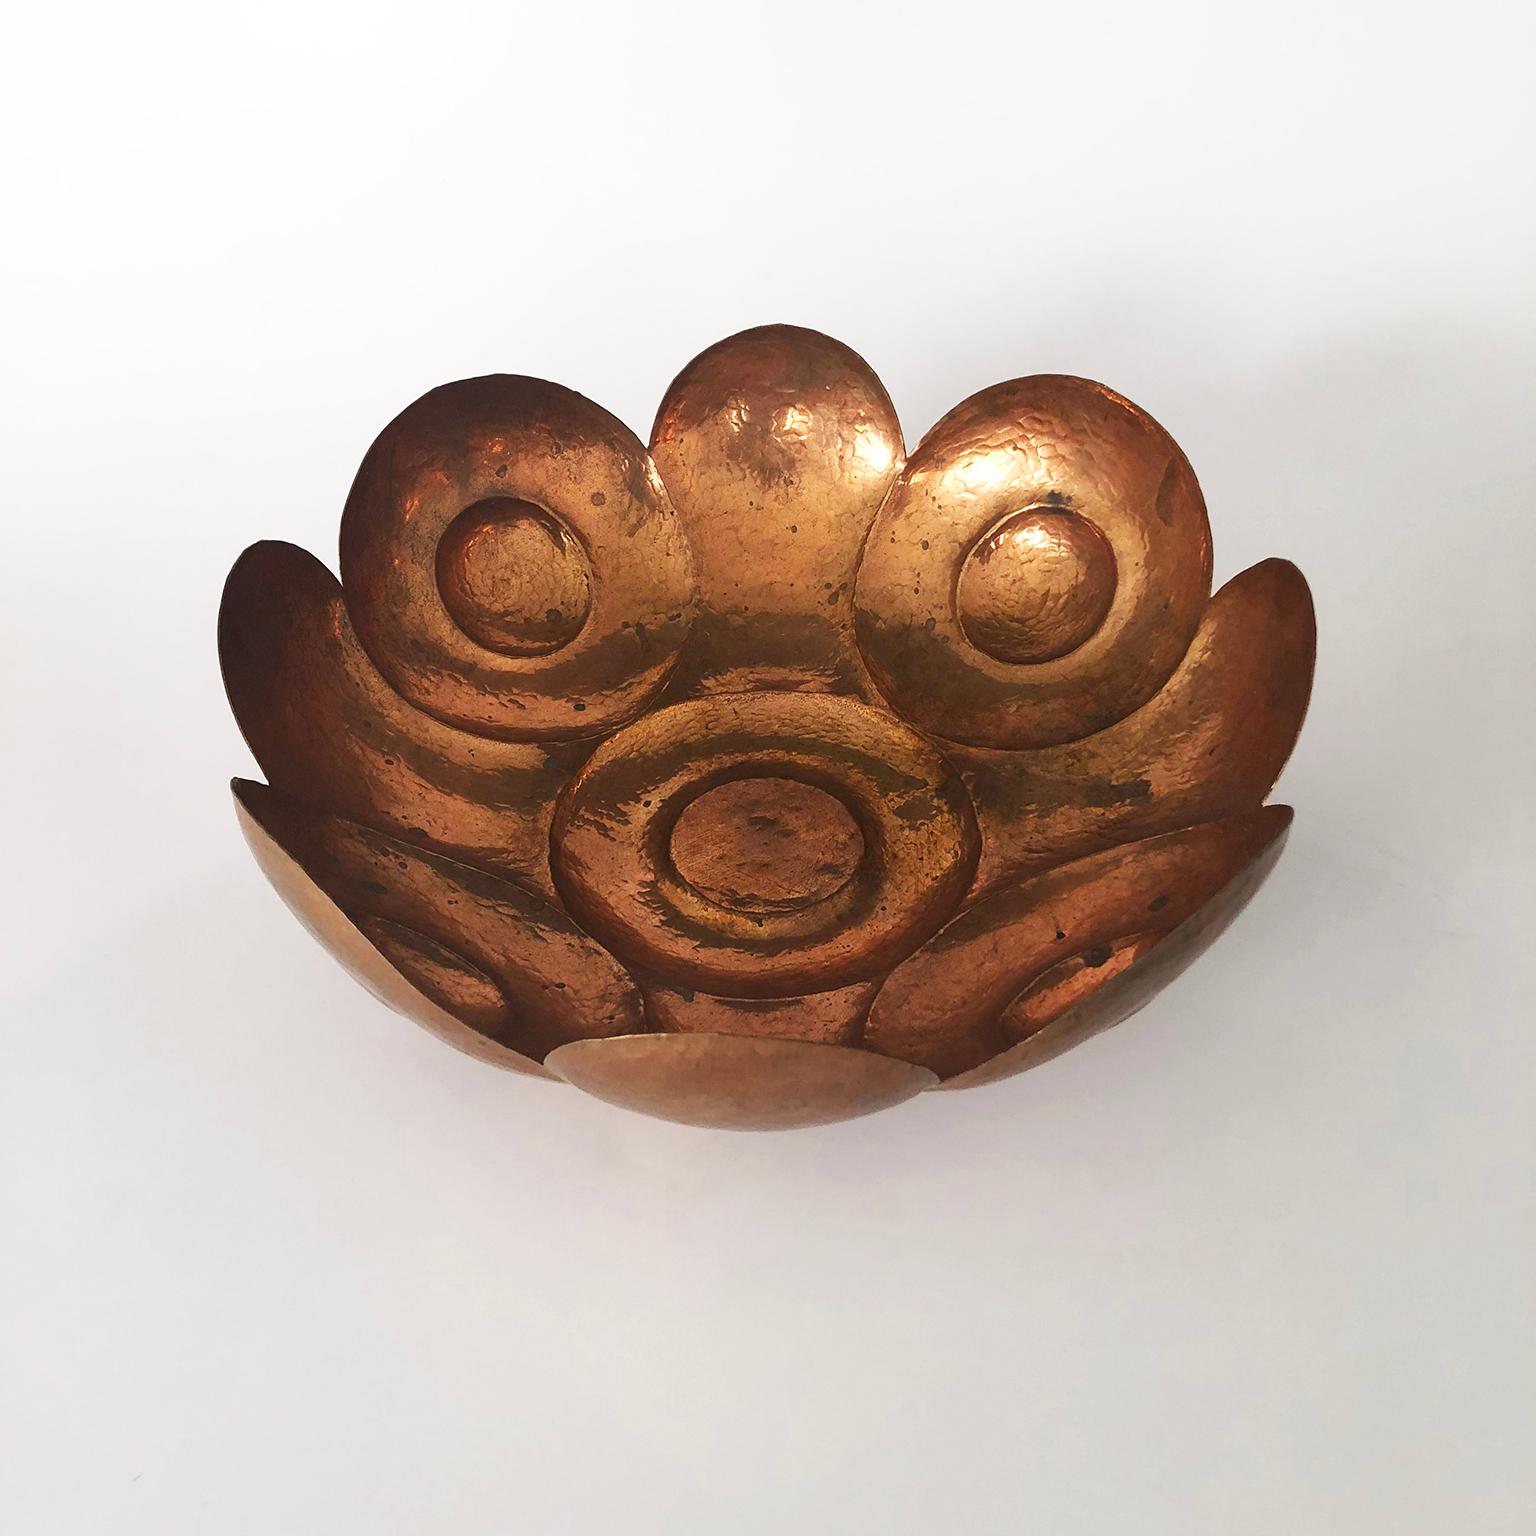 We offer this beautiful Mexican hand-hammered copper bowl with wonderful patina, circa 1960.